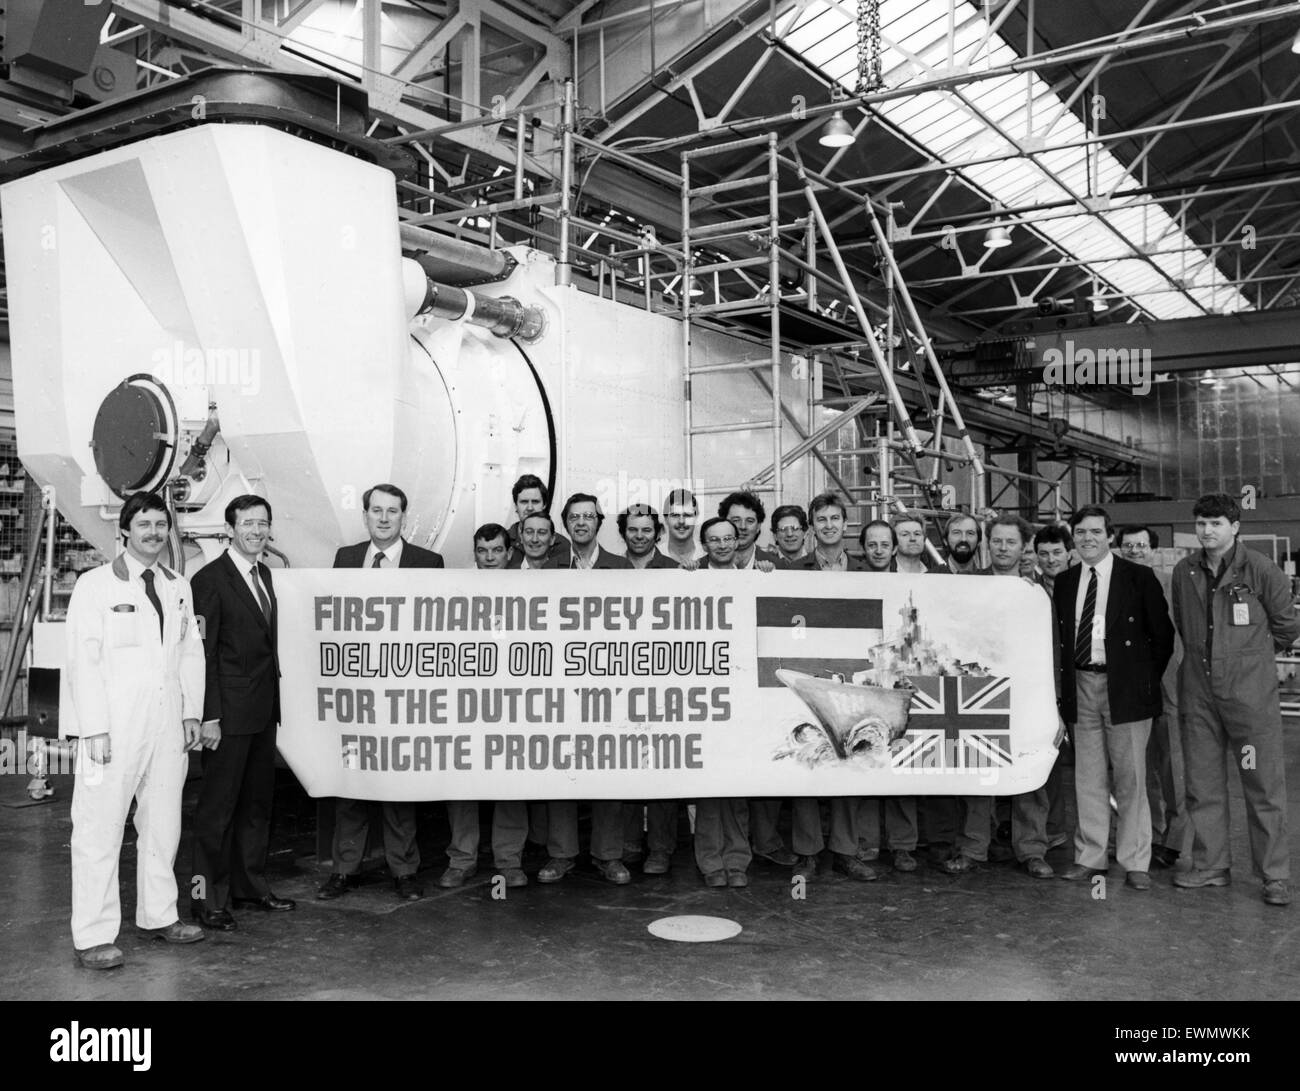 Rolls Royce, Ansty engineering works. Coventry. March 1987. The plant has reached a milestone in the development of a new generation of new, more powerful, marine engines. The factory last night tested the new marine Spey gas turbine engine destined to po Stock Photo